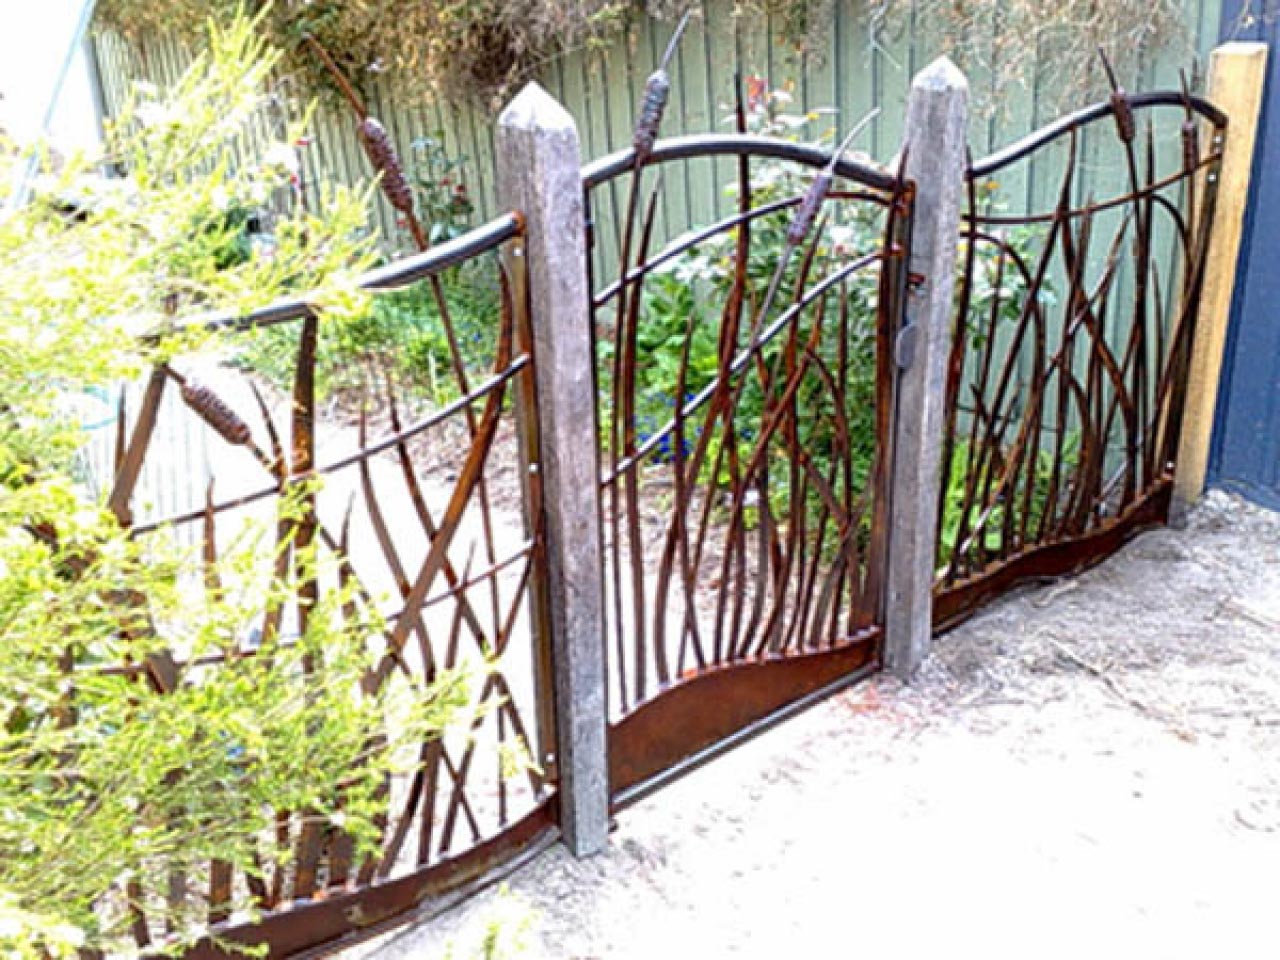 Make Your Lawn Well-Groomed With Metal Garden Fence | Garden Design Ideas